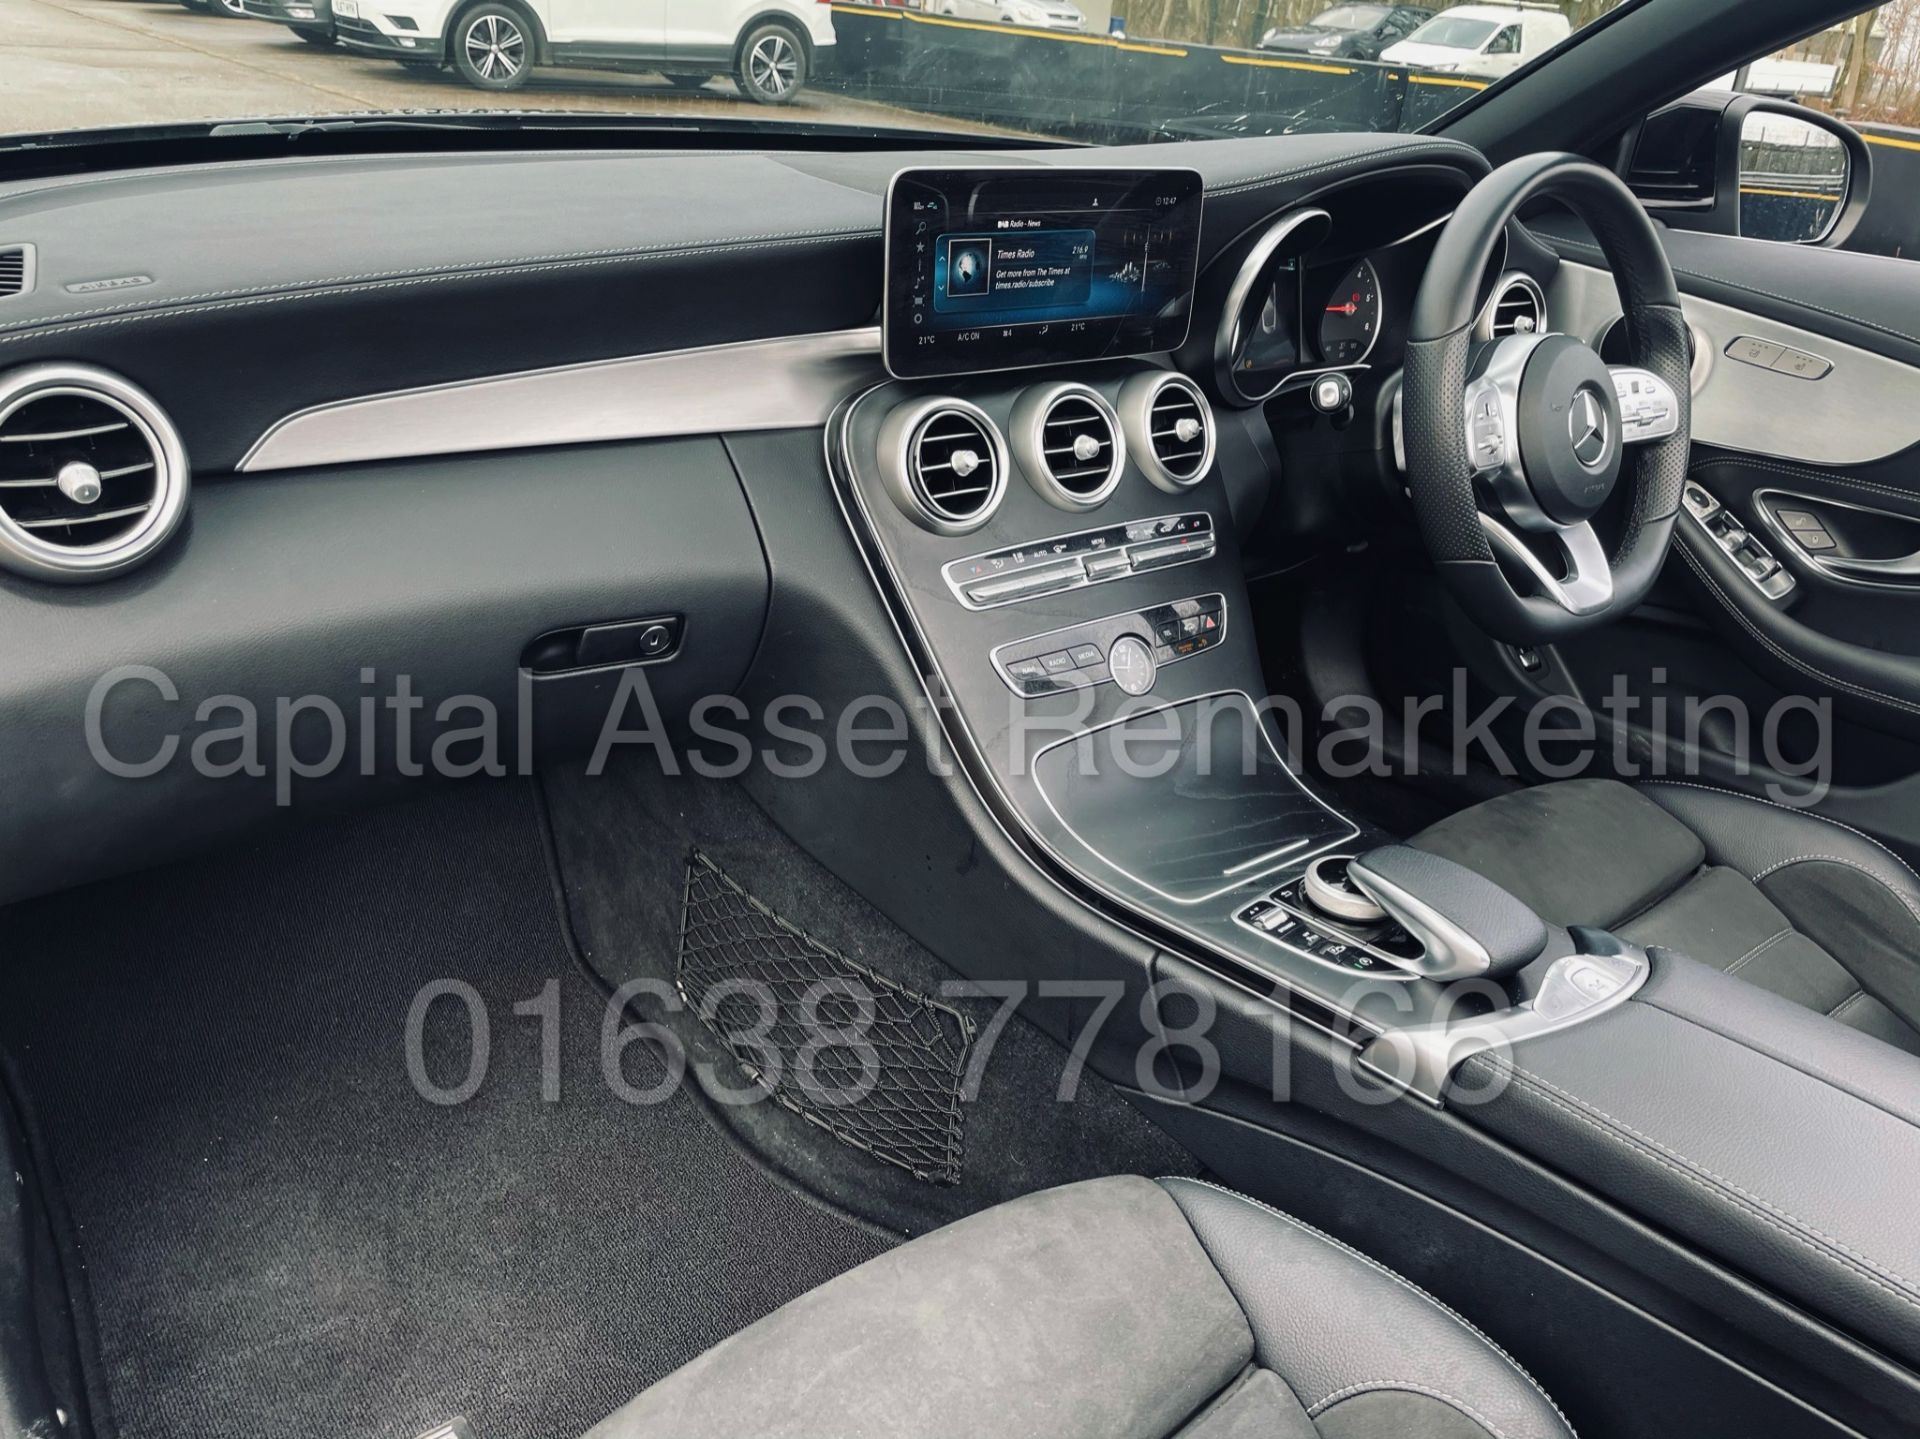 (ON SALE) MERCEDES-BENZ C220D *AMG LINE - CABRIOLET* (2019) '9G TRONIC AUTO - LEATHER - SAT NAV' - Image 31 of 56